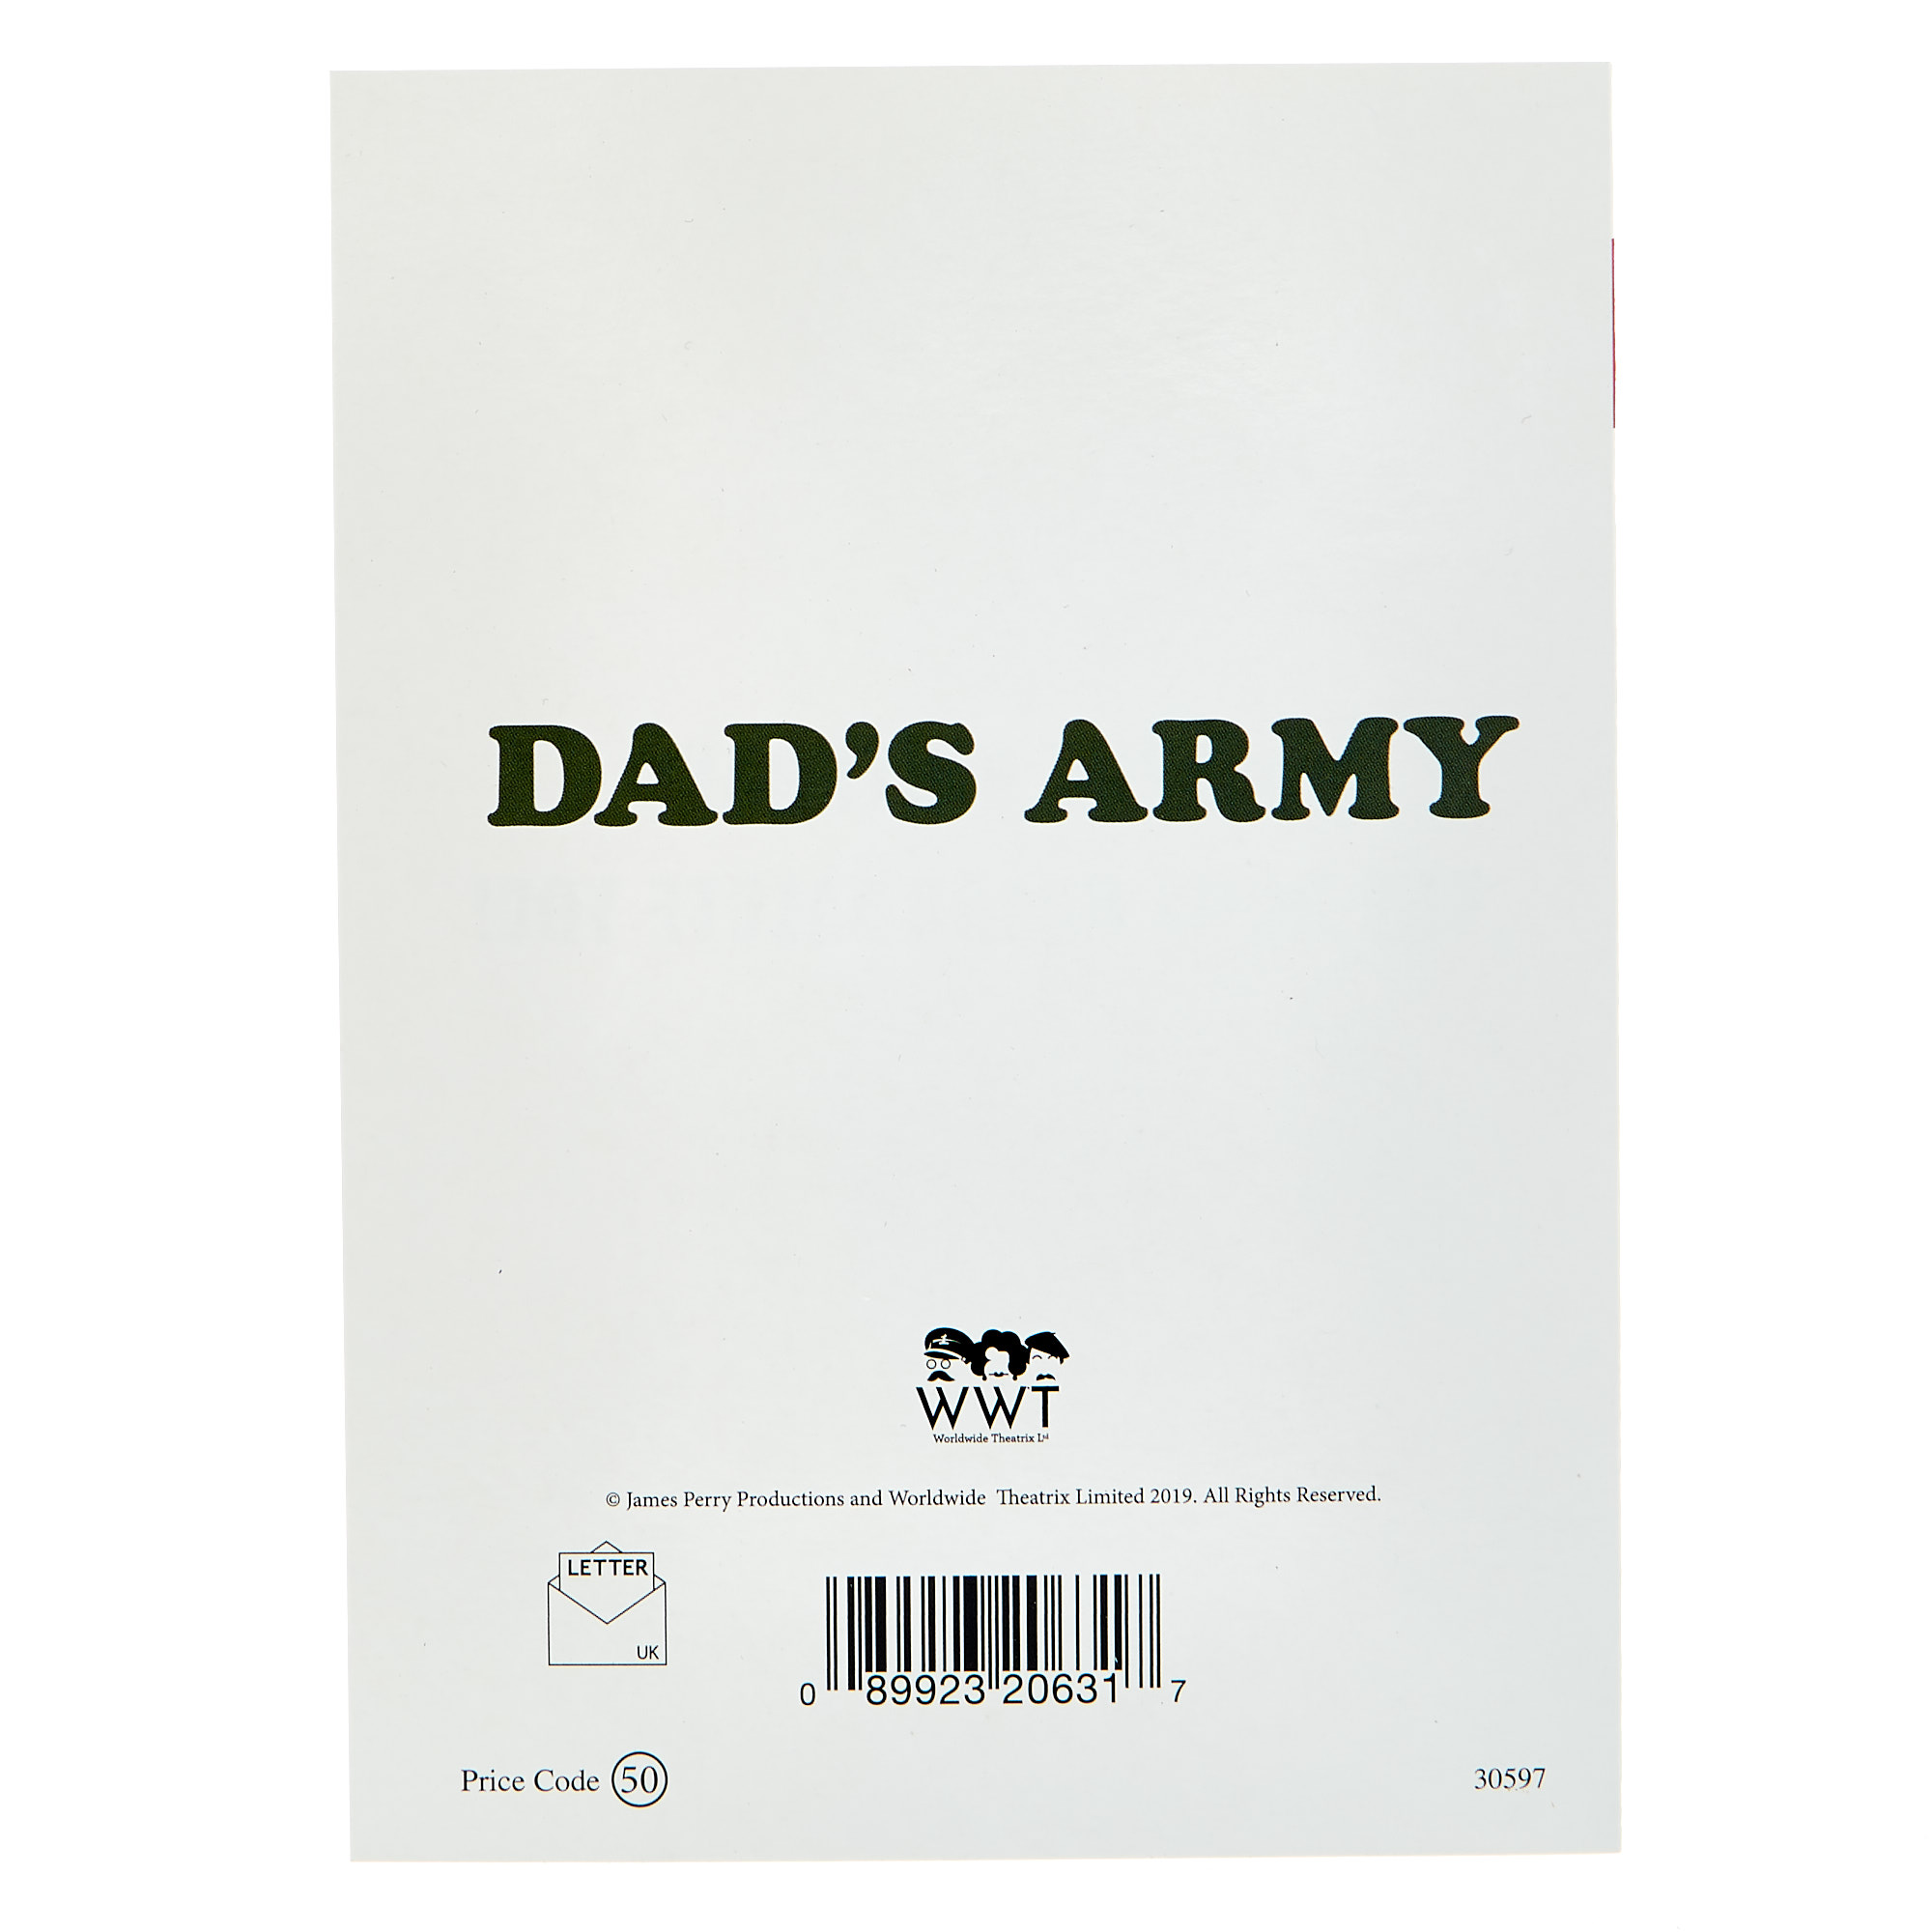 Dad's Army Birthday Card - Charge!!!